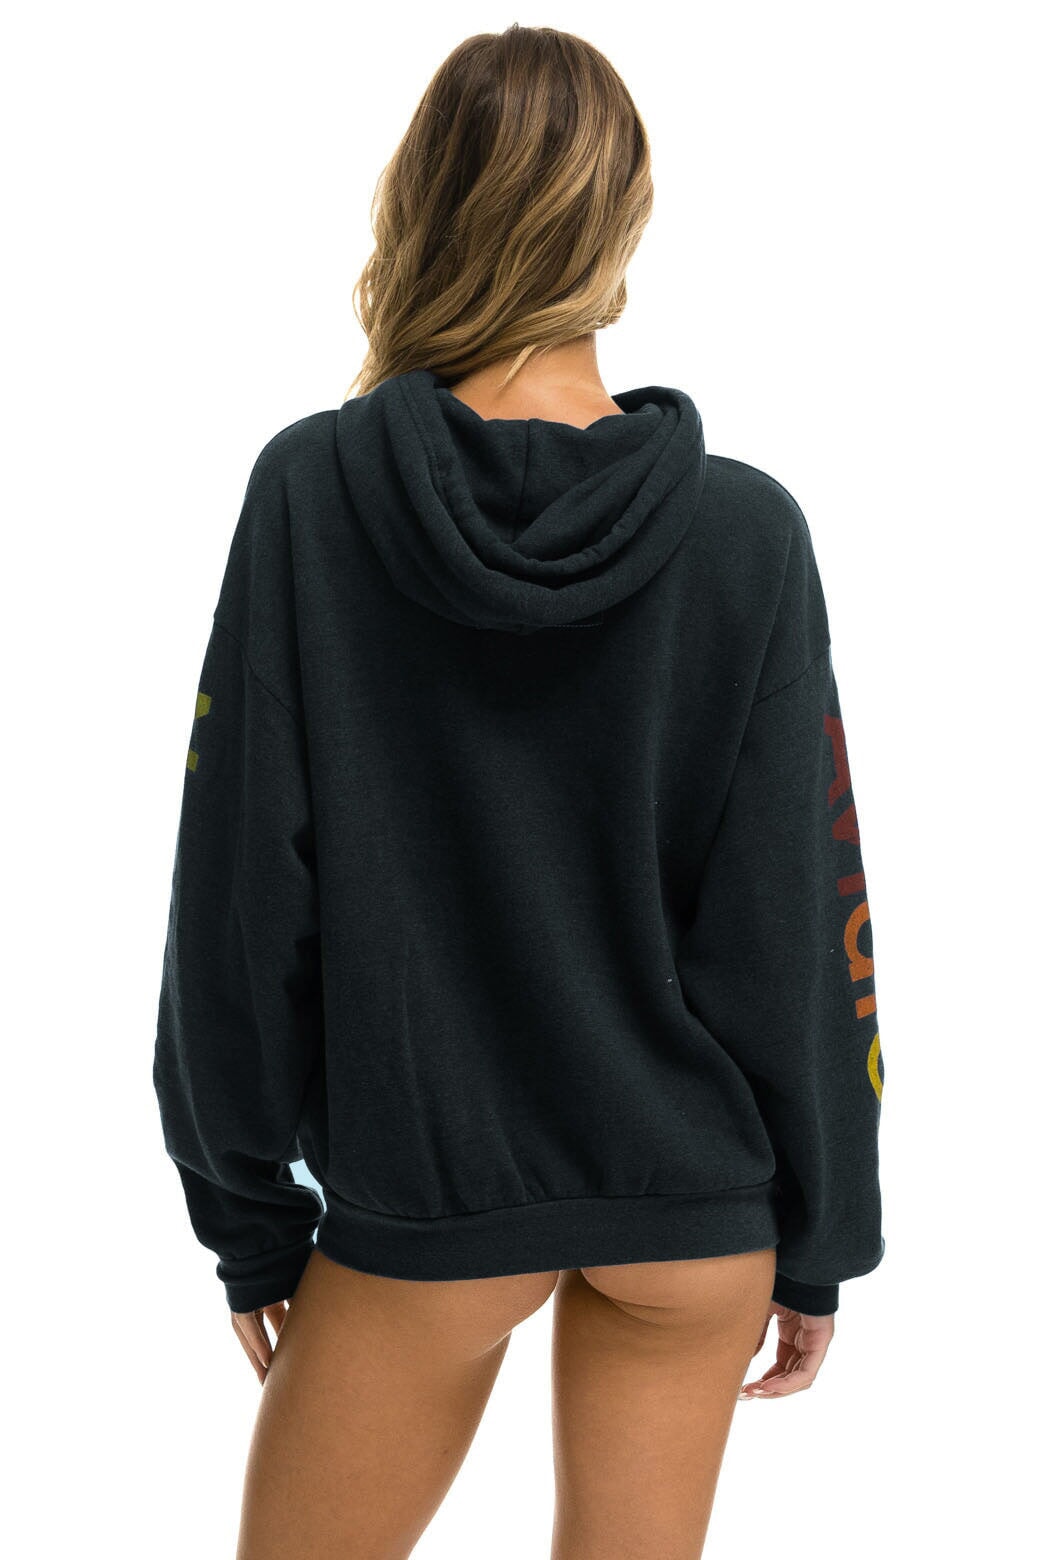 AVIATOR NATION MIAMI RELAXED PULLOVER HOODIE - CHARCOAL Hoodie Aviator Nation 